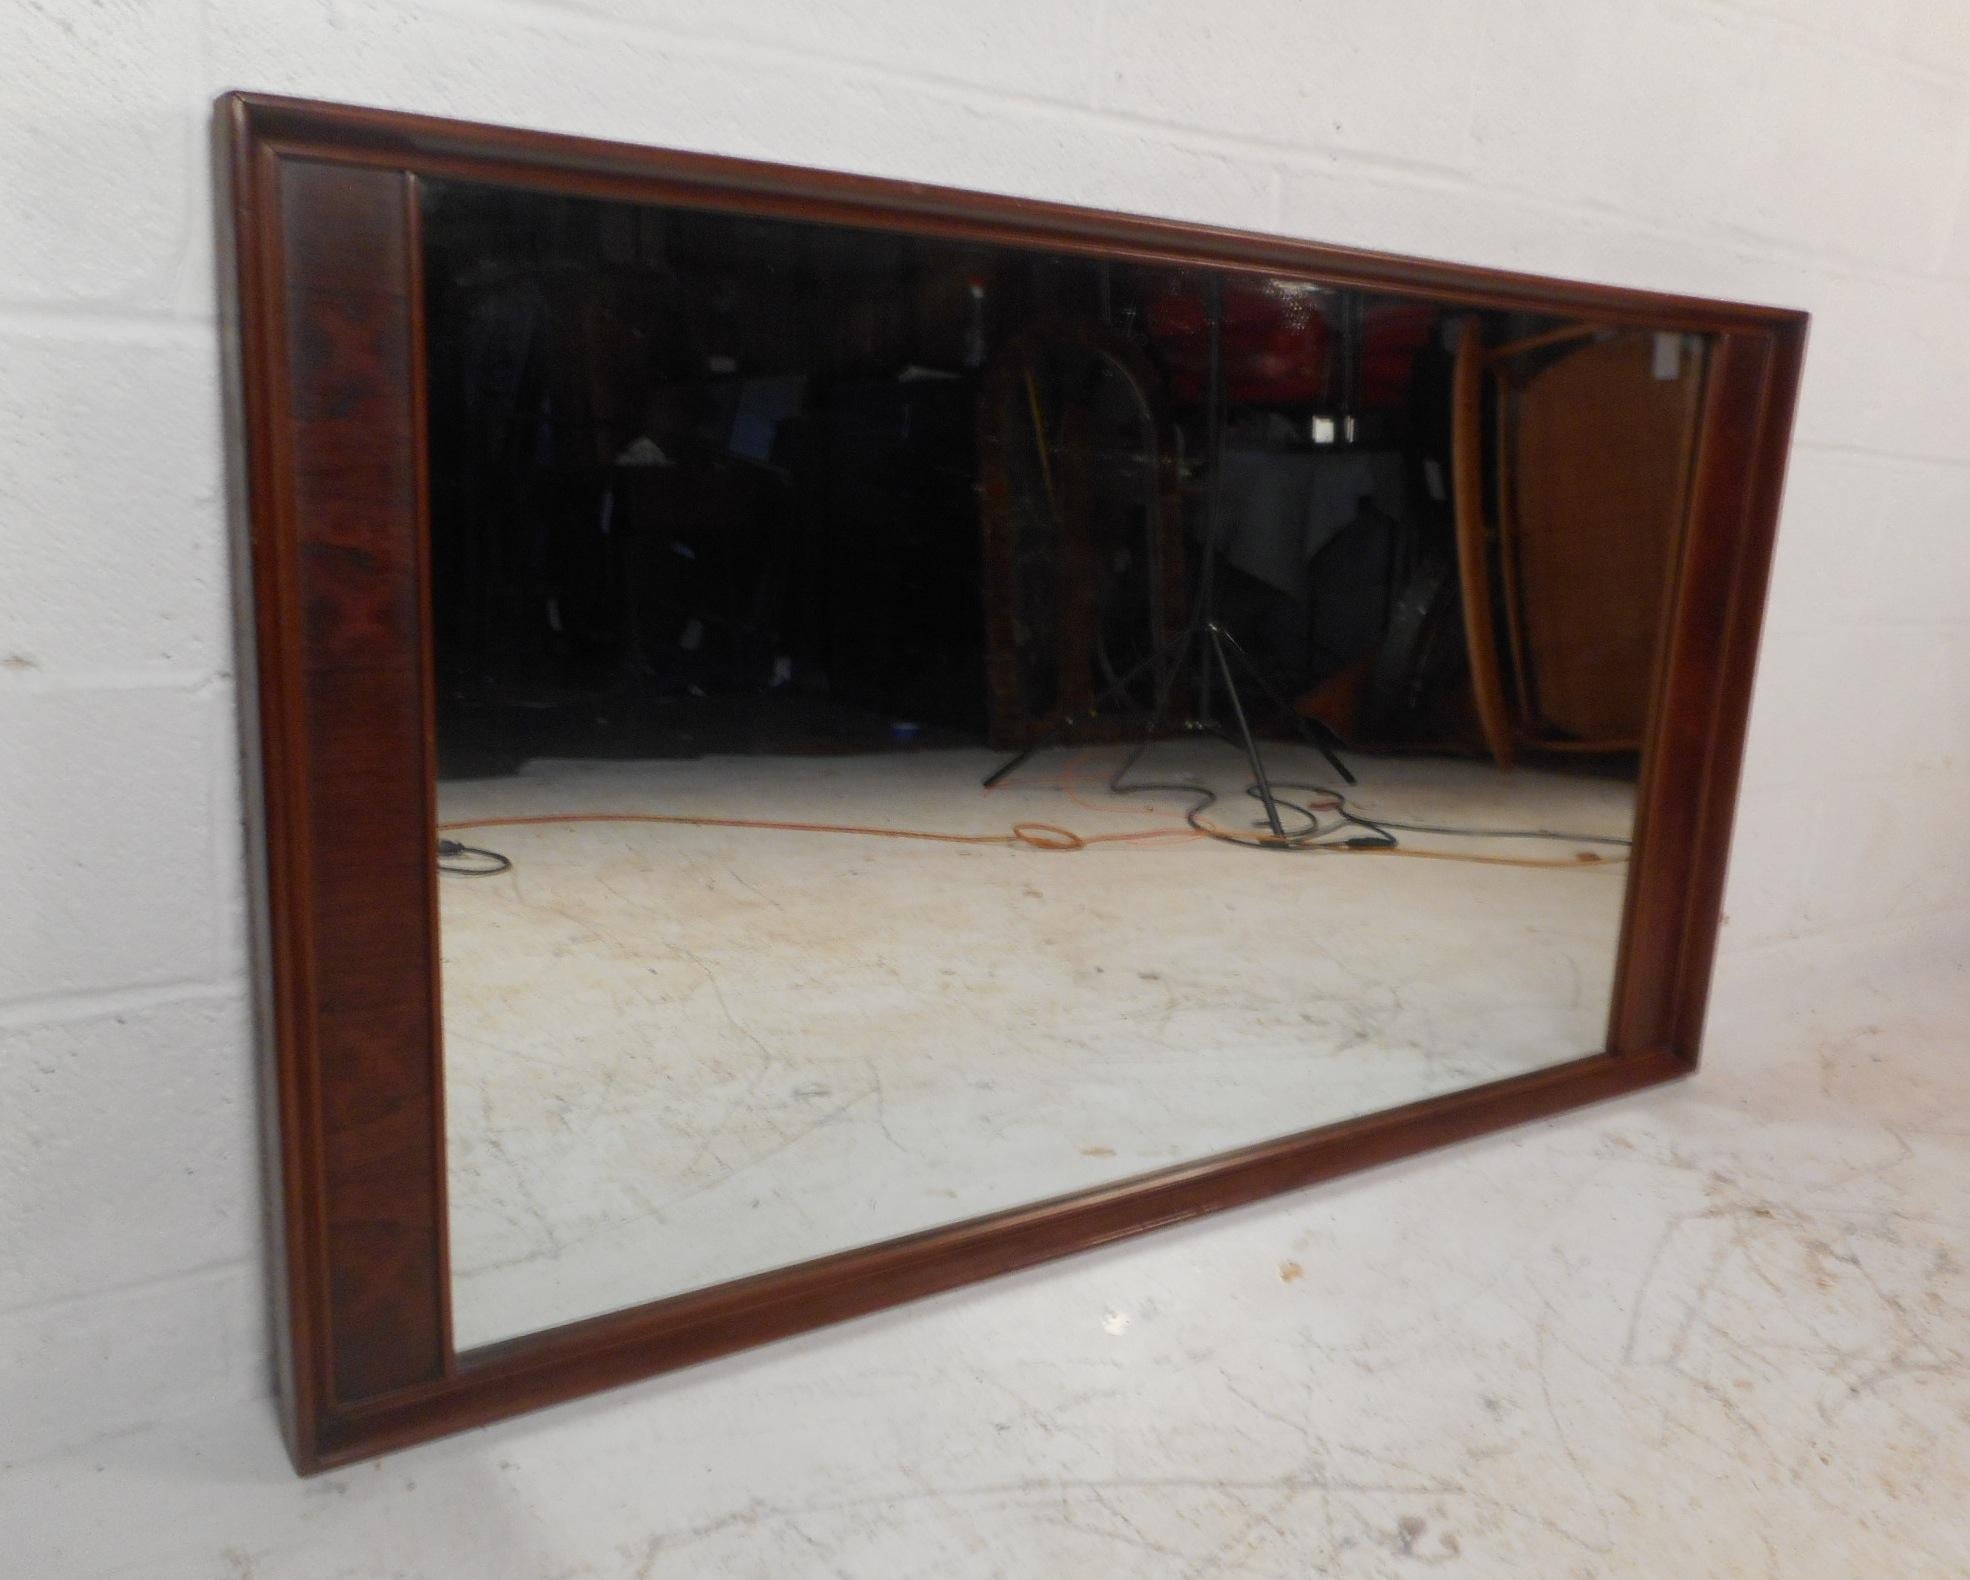 This impressive vintage modern mirror features a two-tone design with rosewood and walnut wood. A beautiful rectangular mirror that can be placed on the back of a dresser or hung on the wall. The unique raised and beveled edges make this mirror